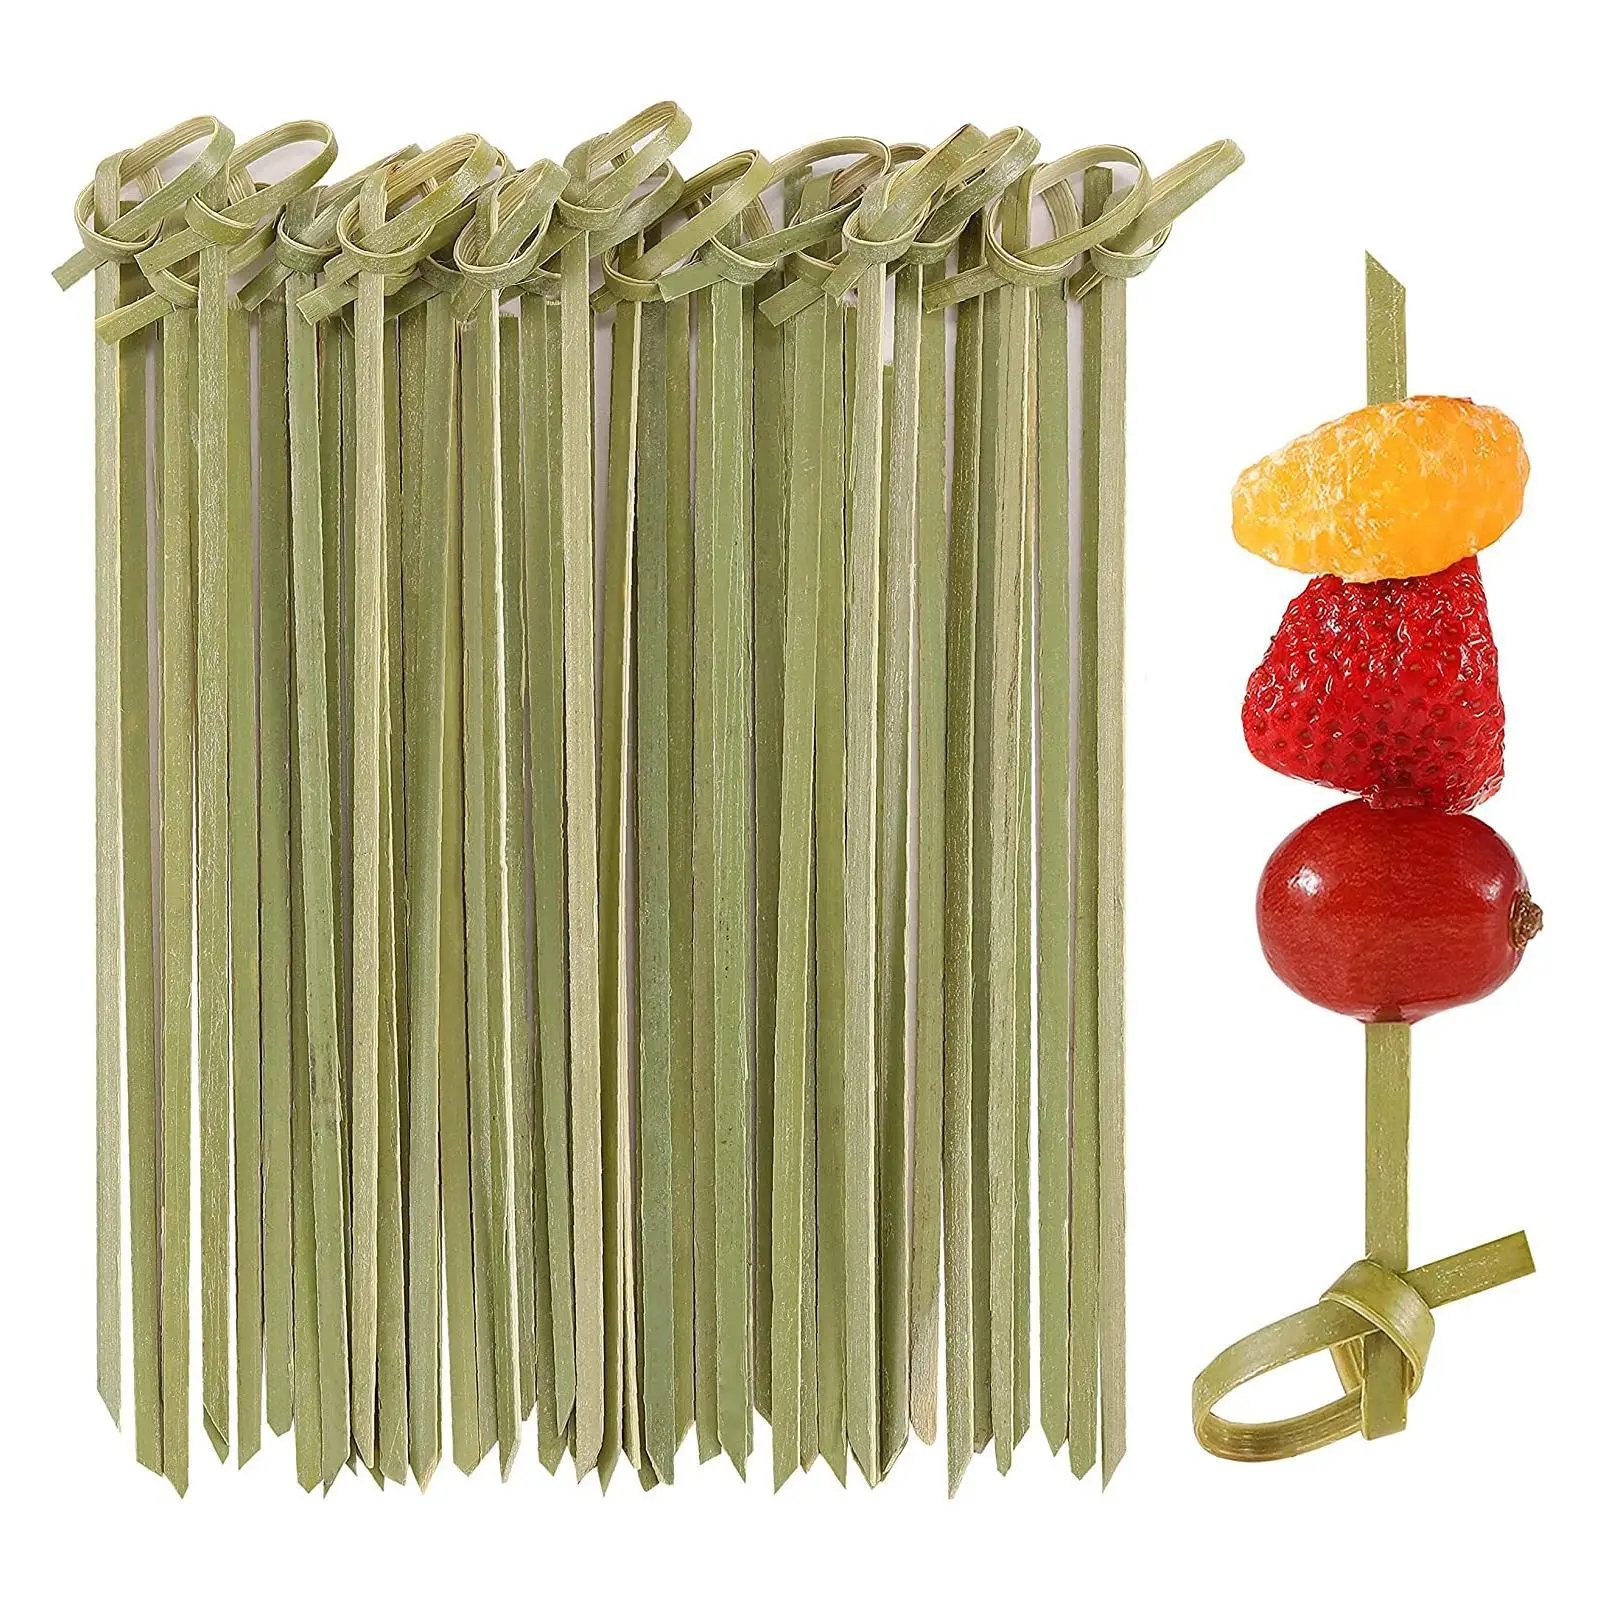 

100Pcs 12/15cm Disposable Bamboo Tie Bamboo Knot Food Picks With Twisted Appetizer Sandwich Cocktail Drinks Skewer Toothpicks